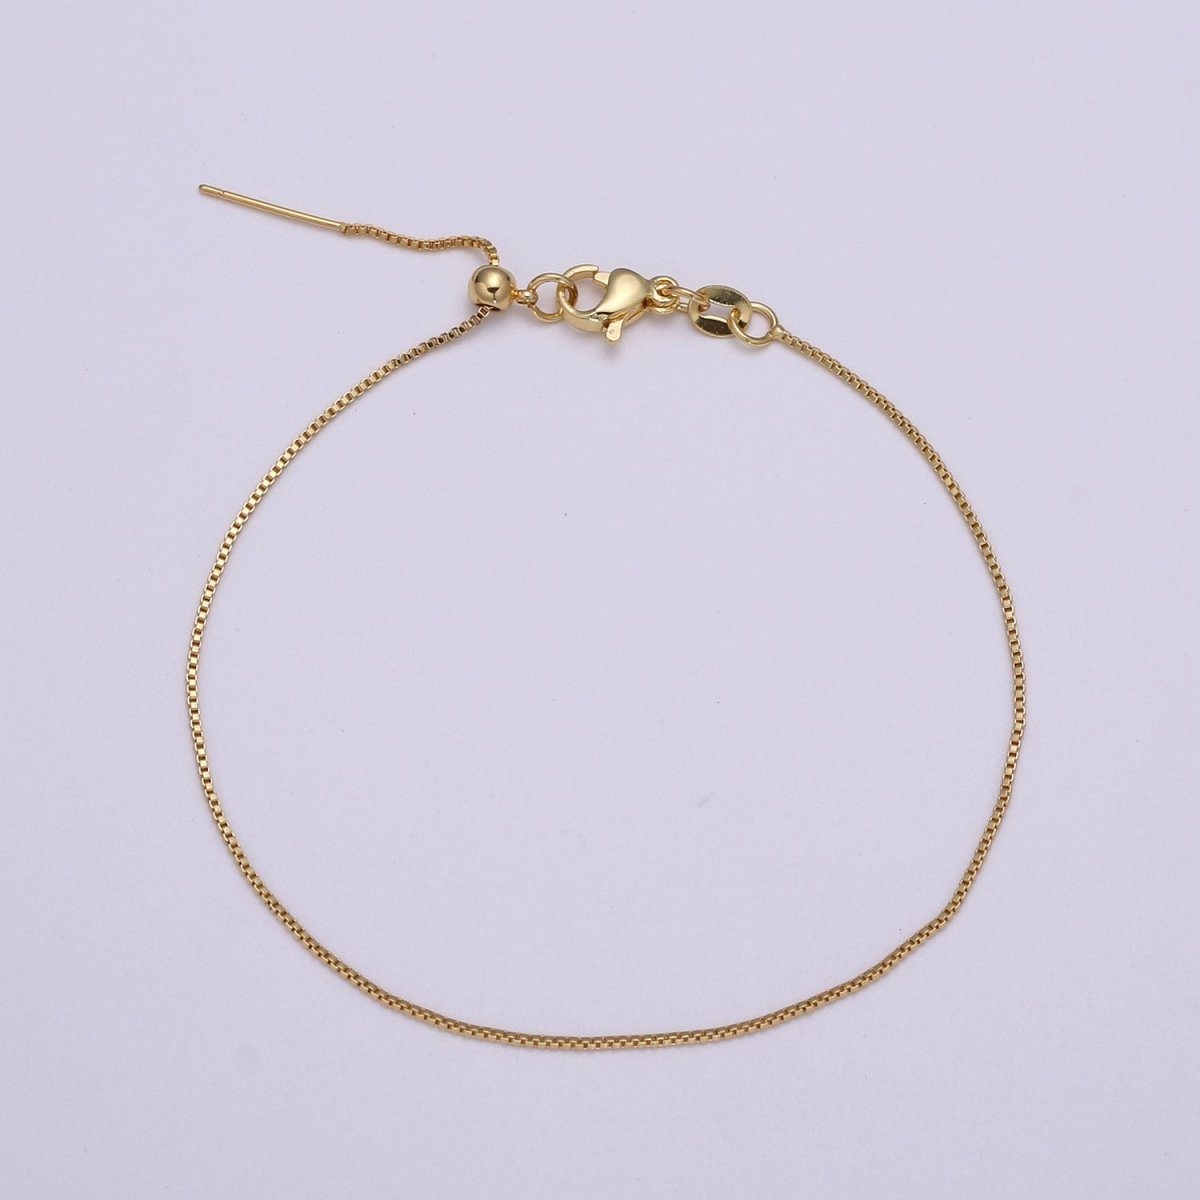 Gold Filled 8.5 long Chain with Lobster Clasp For DIY Jewelry Making Bracelet Anklet L-206~L-209 - DLUXCA